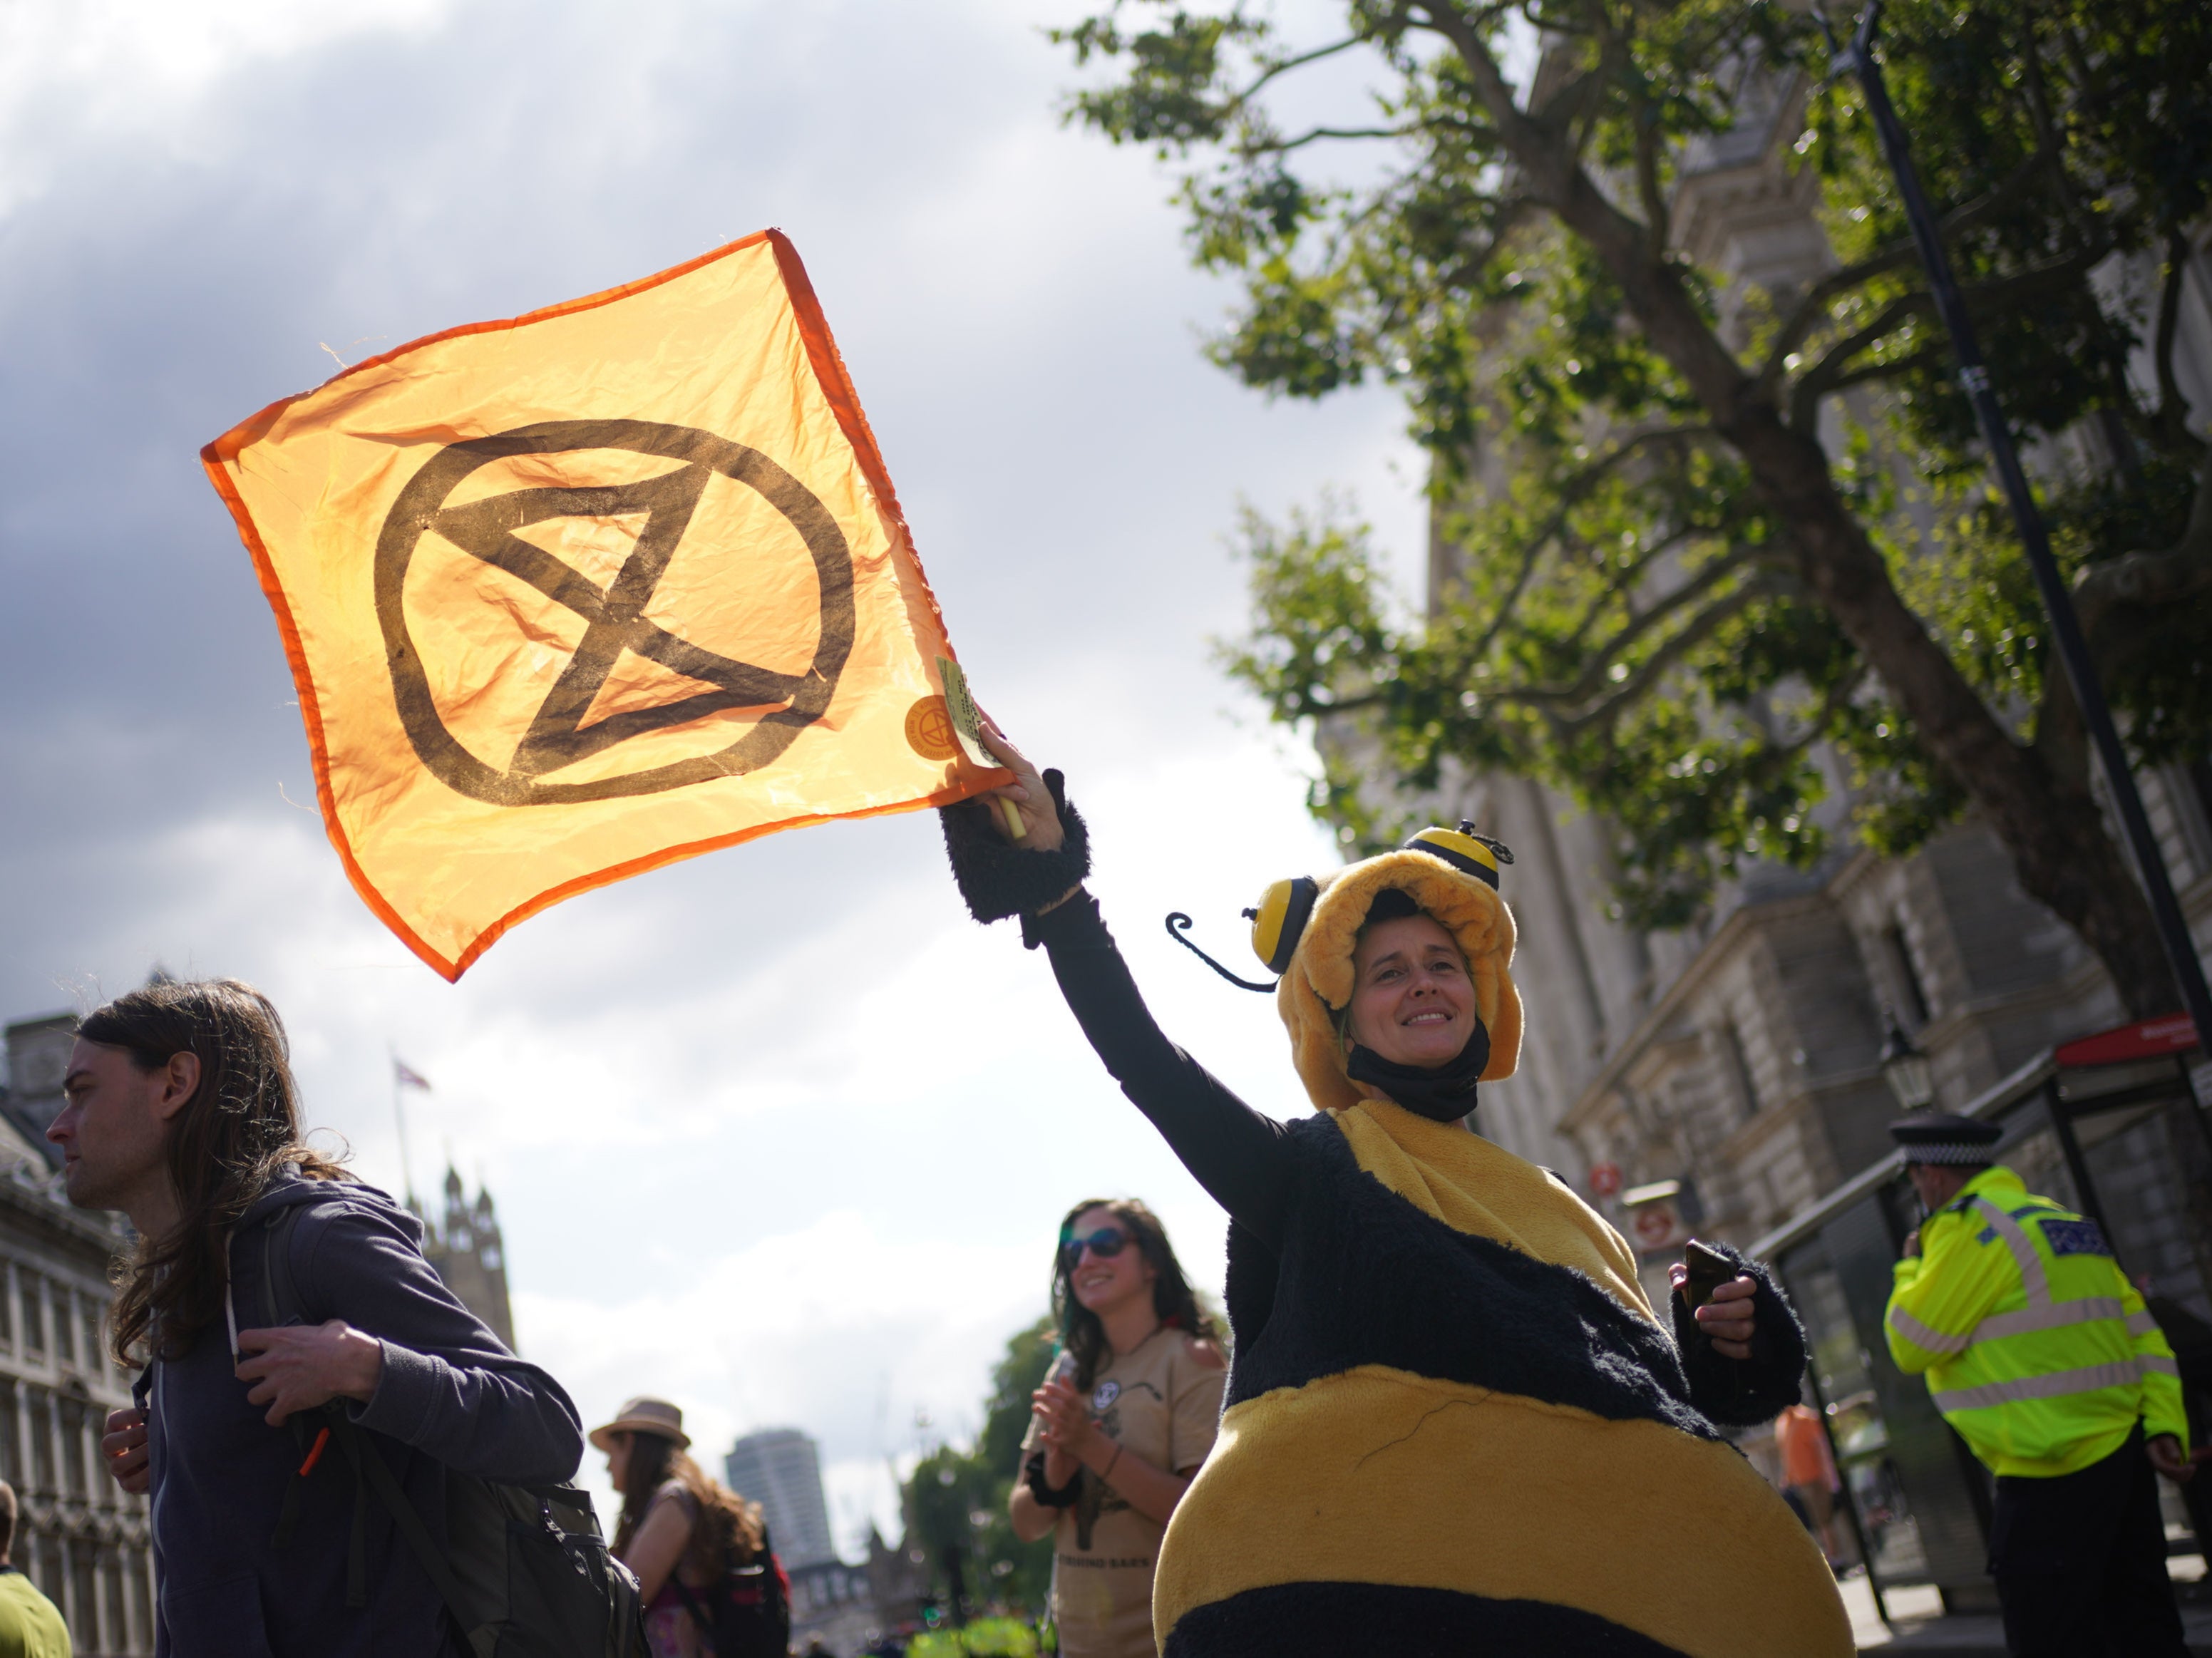 A demonstrator dressed as bee during a protest by members of Extinction Rebellion on Whitehall, in central London on 24 August 2021